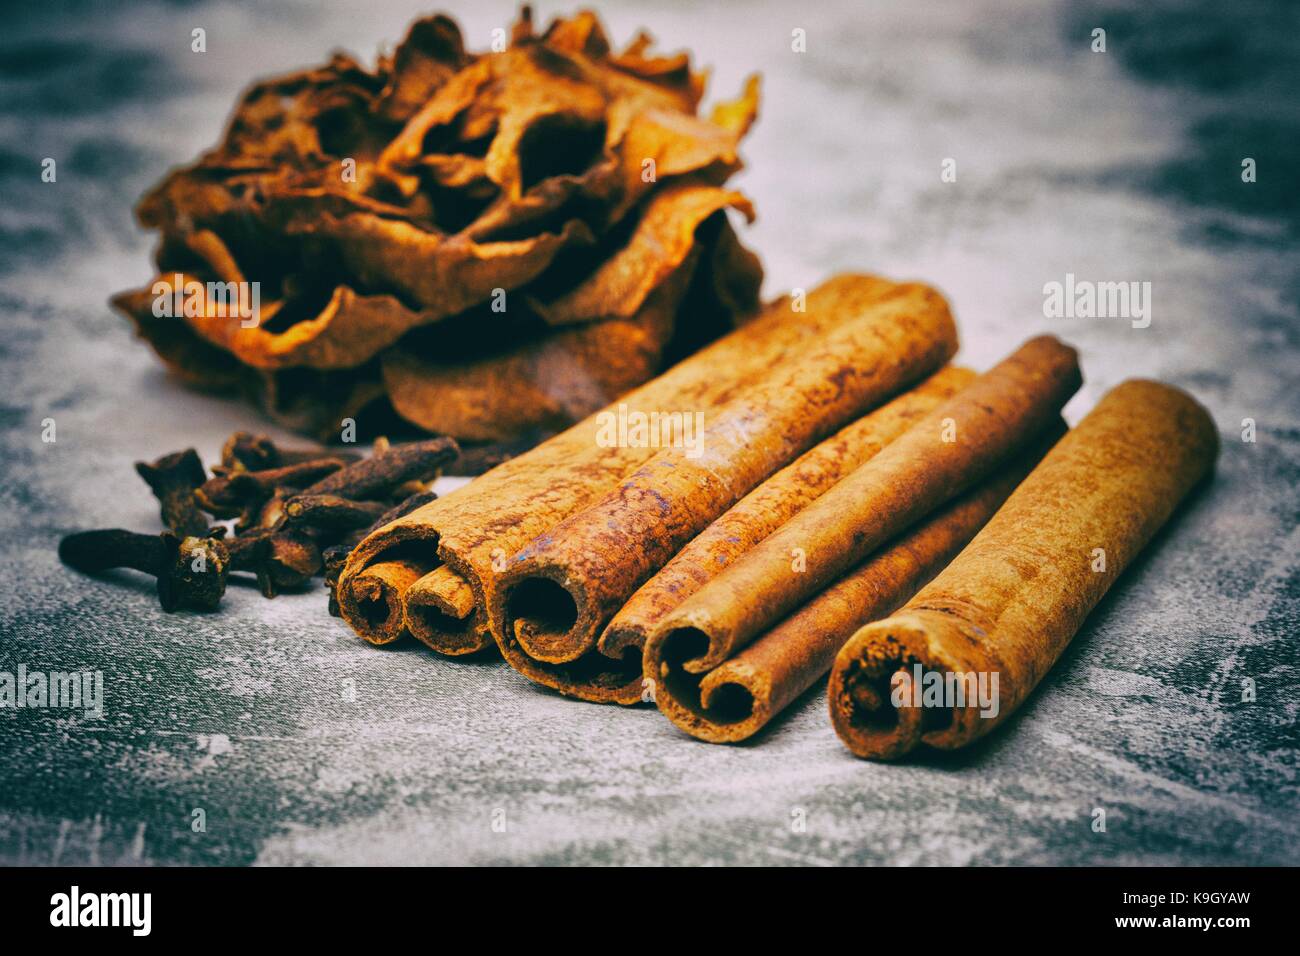 A dry rose, cinnamon and gloves on a vintage background Stock Photo